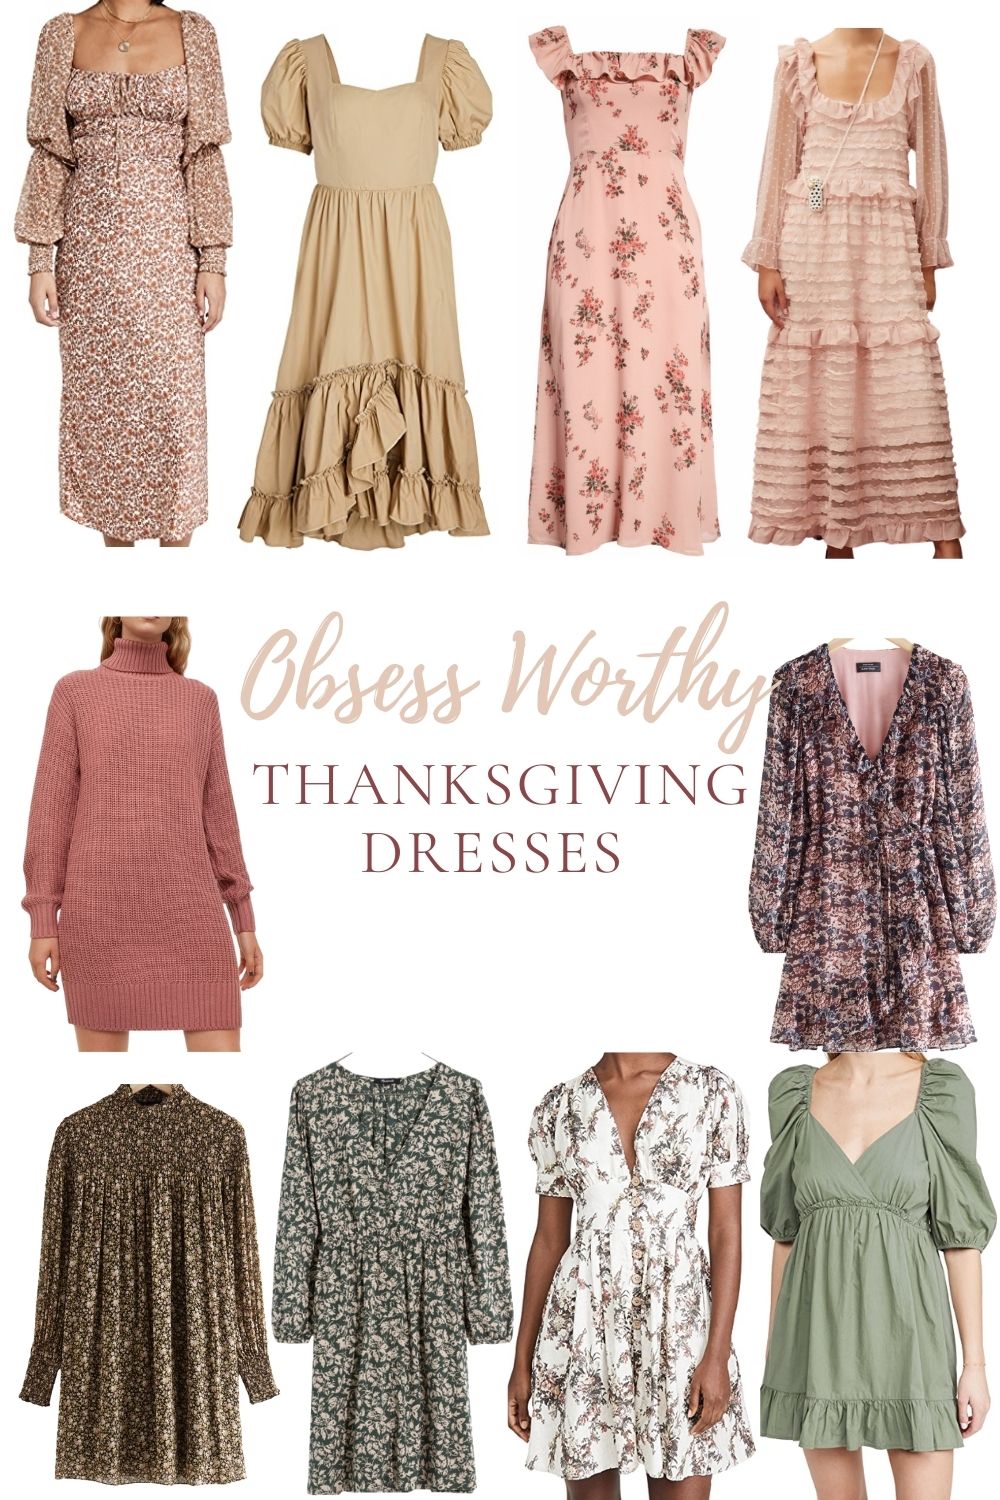 Dresses to Wear to Thanksgiving Dinner Hannah McDonnell